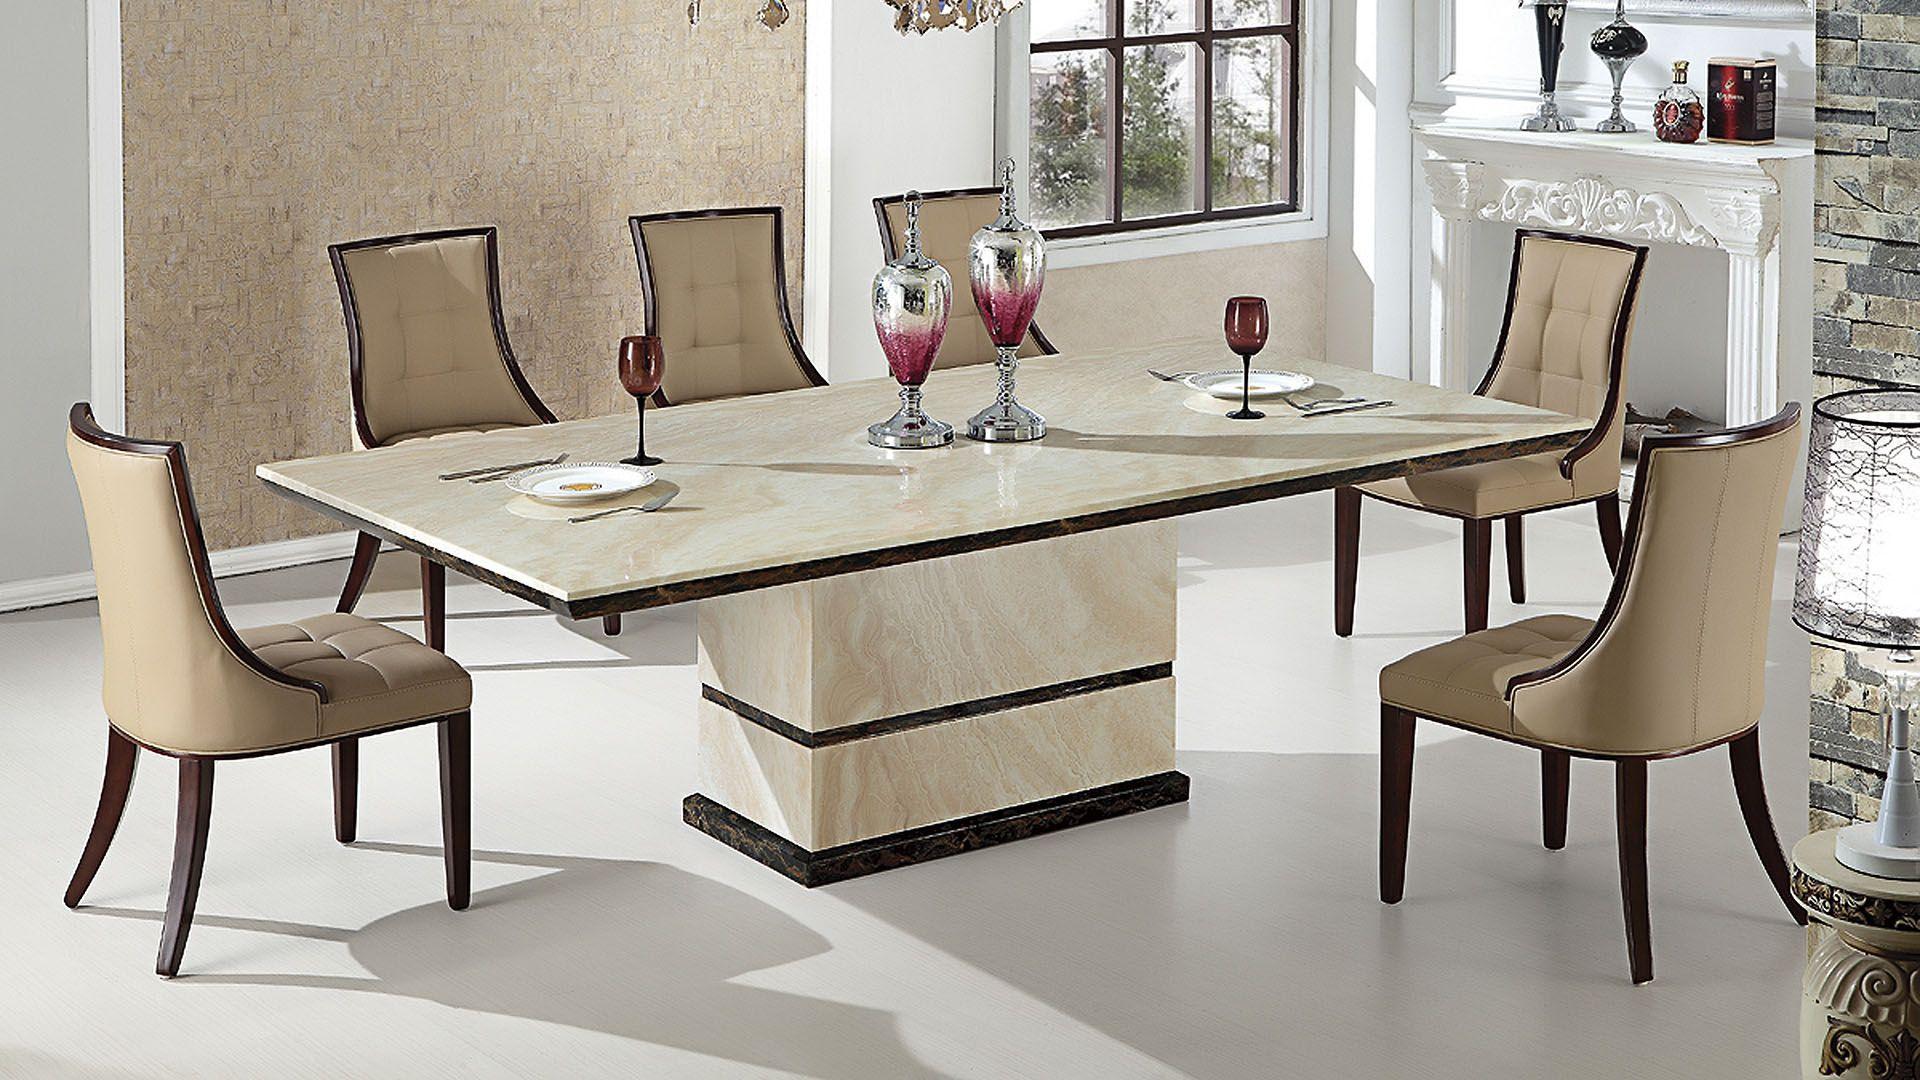 Modern Dining Table DT-H28 DT-H28 in Tan 